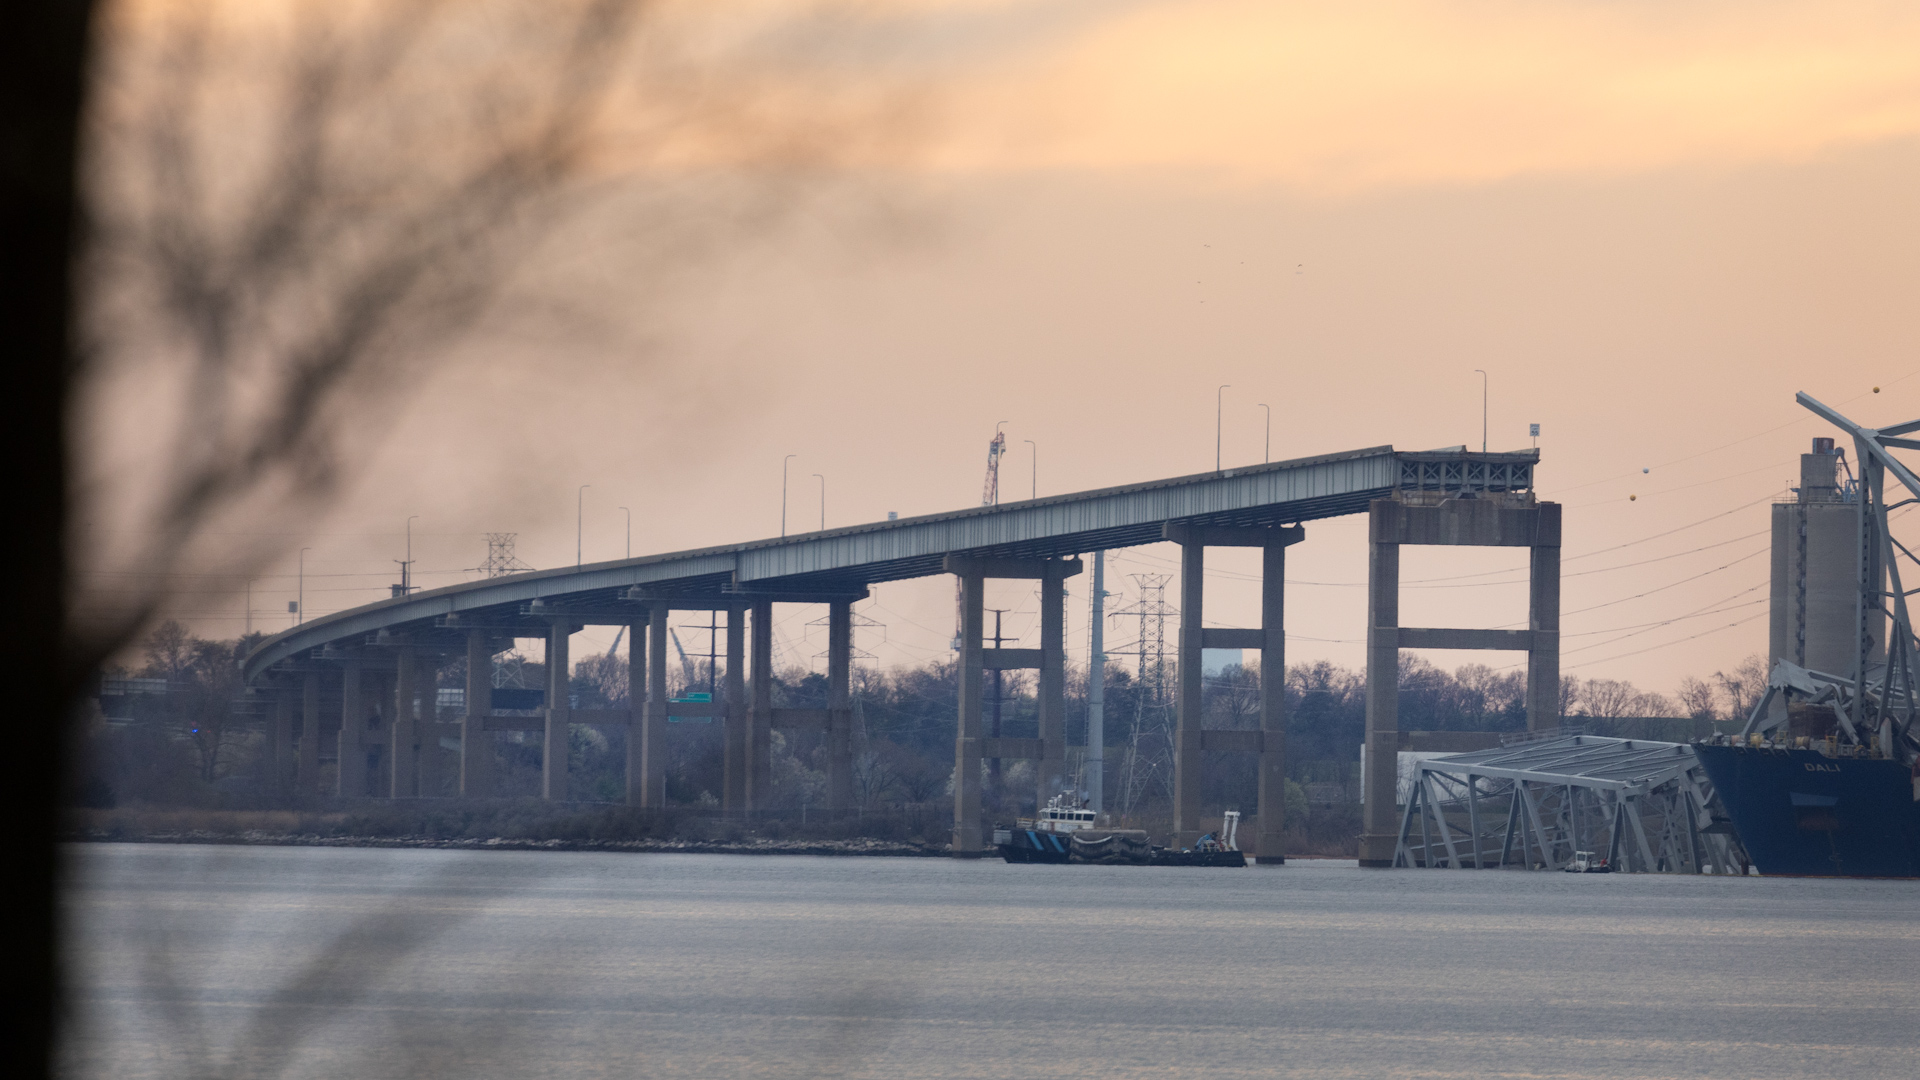 Following the deadly collapse of the Francis Scott Key Bridge on Tuesday, the Biden administration has allocated  million in federal aid to Maryland. Biden told reporters the Port of Baltimore, a major U.S. shipping hub that saw record cargo volumes last year, is crucial for automobile imports and exports, with around 850,000 vehicles passing through annually.